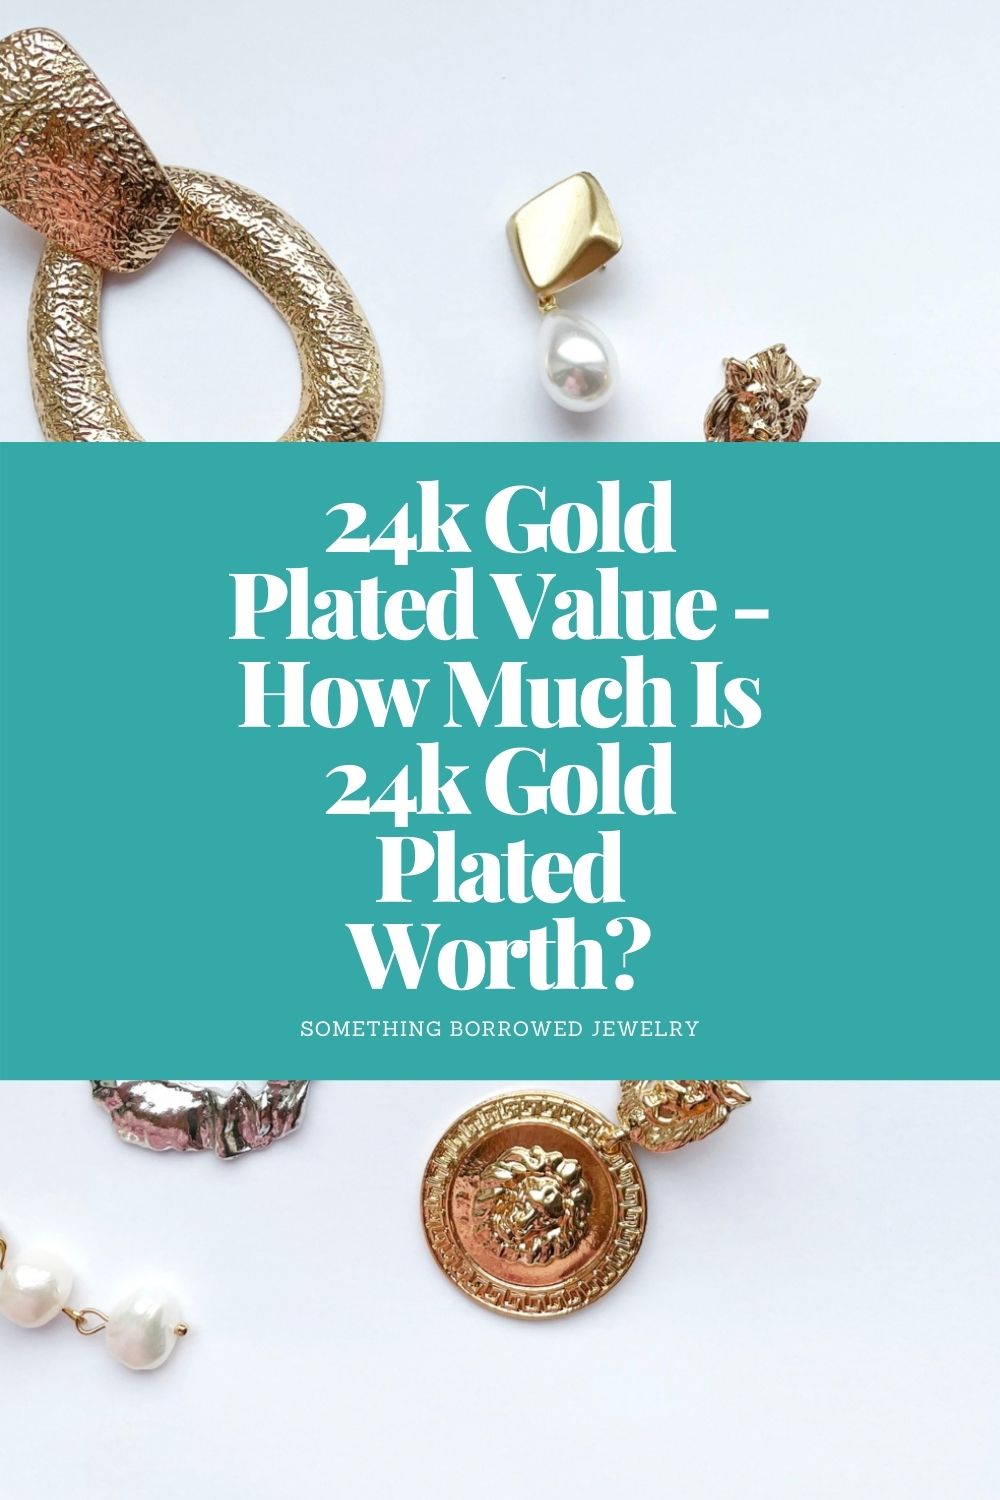 24k Gold Plated Value - How Much Is 24k Gold Plated Worth pin 2